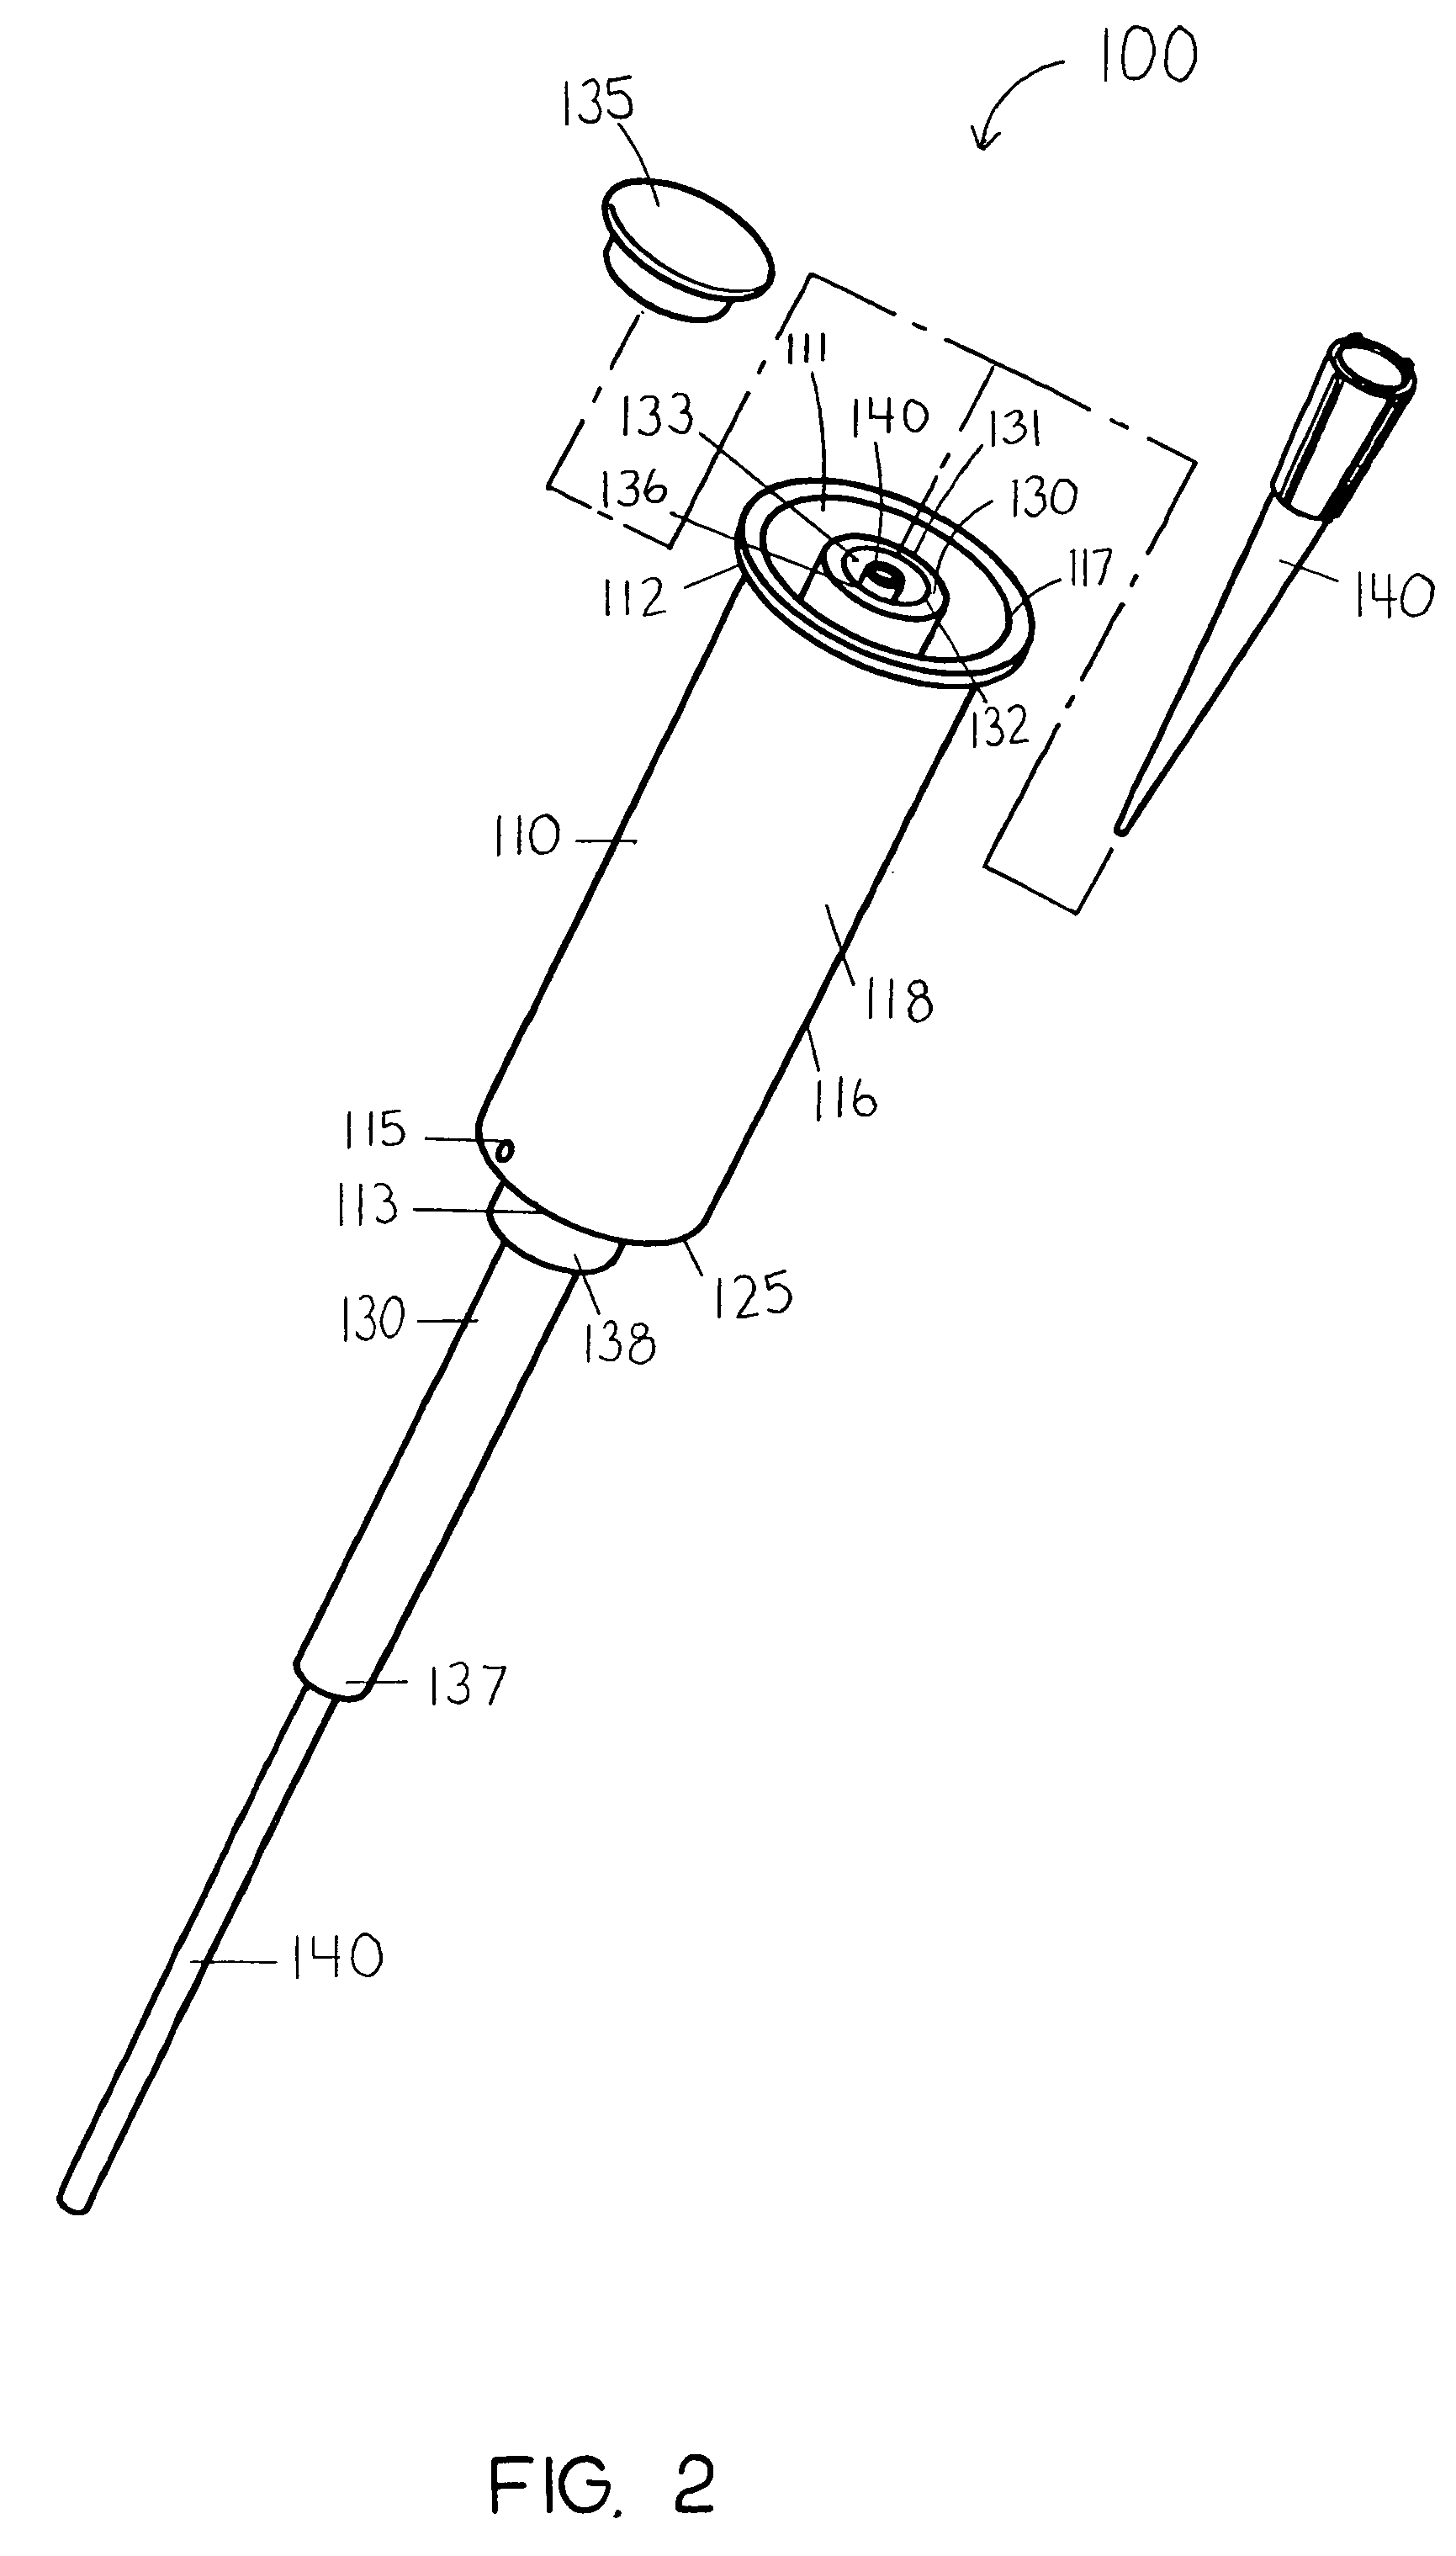 Process for reducing pathogens in a biological sample and removing a sample pellet from a sample tube